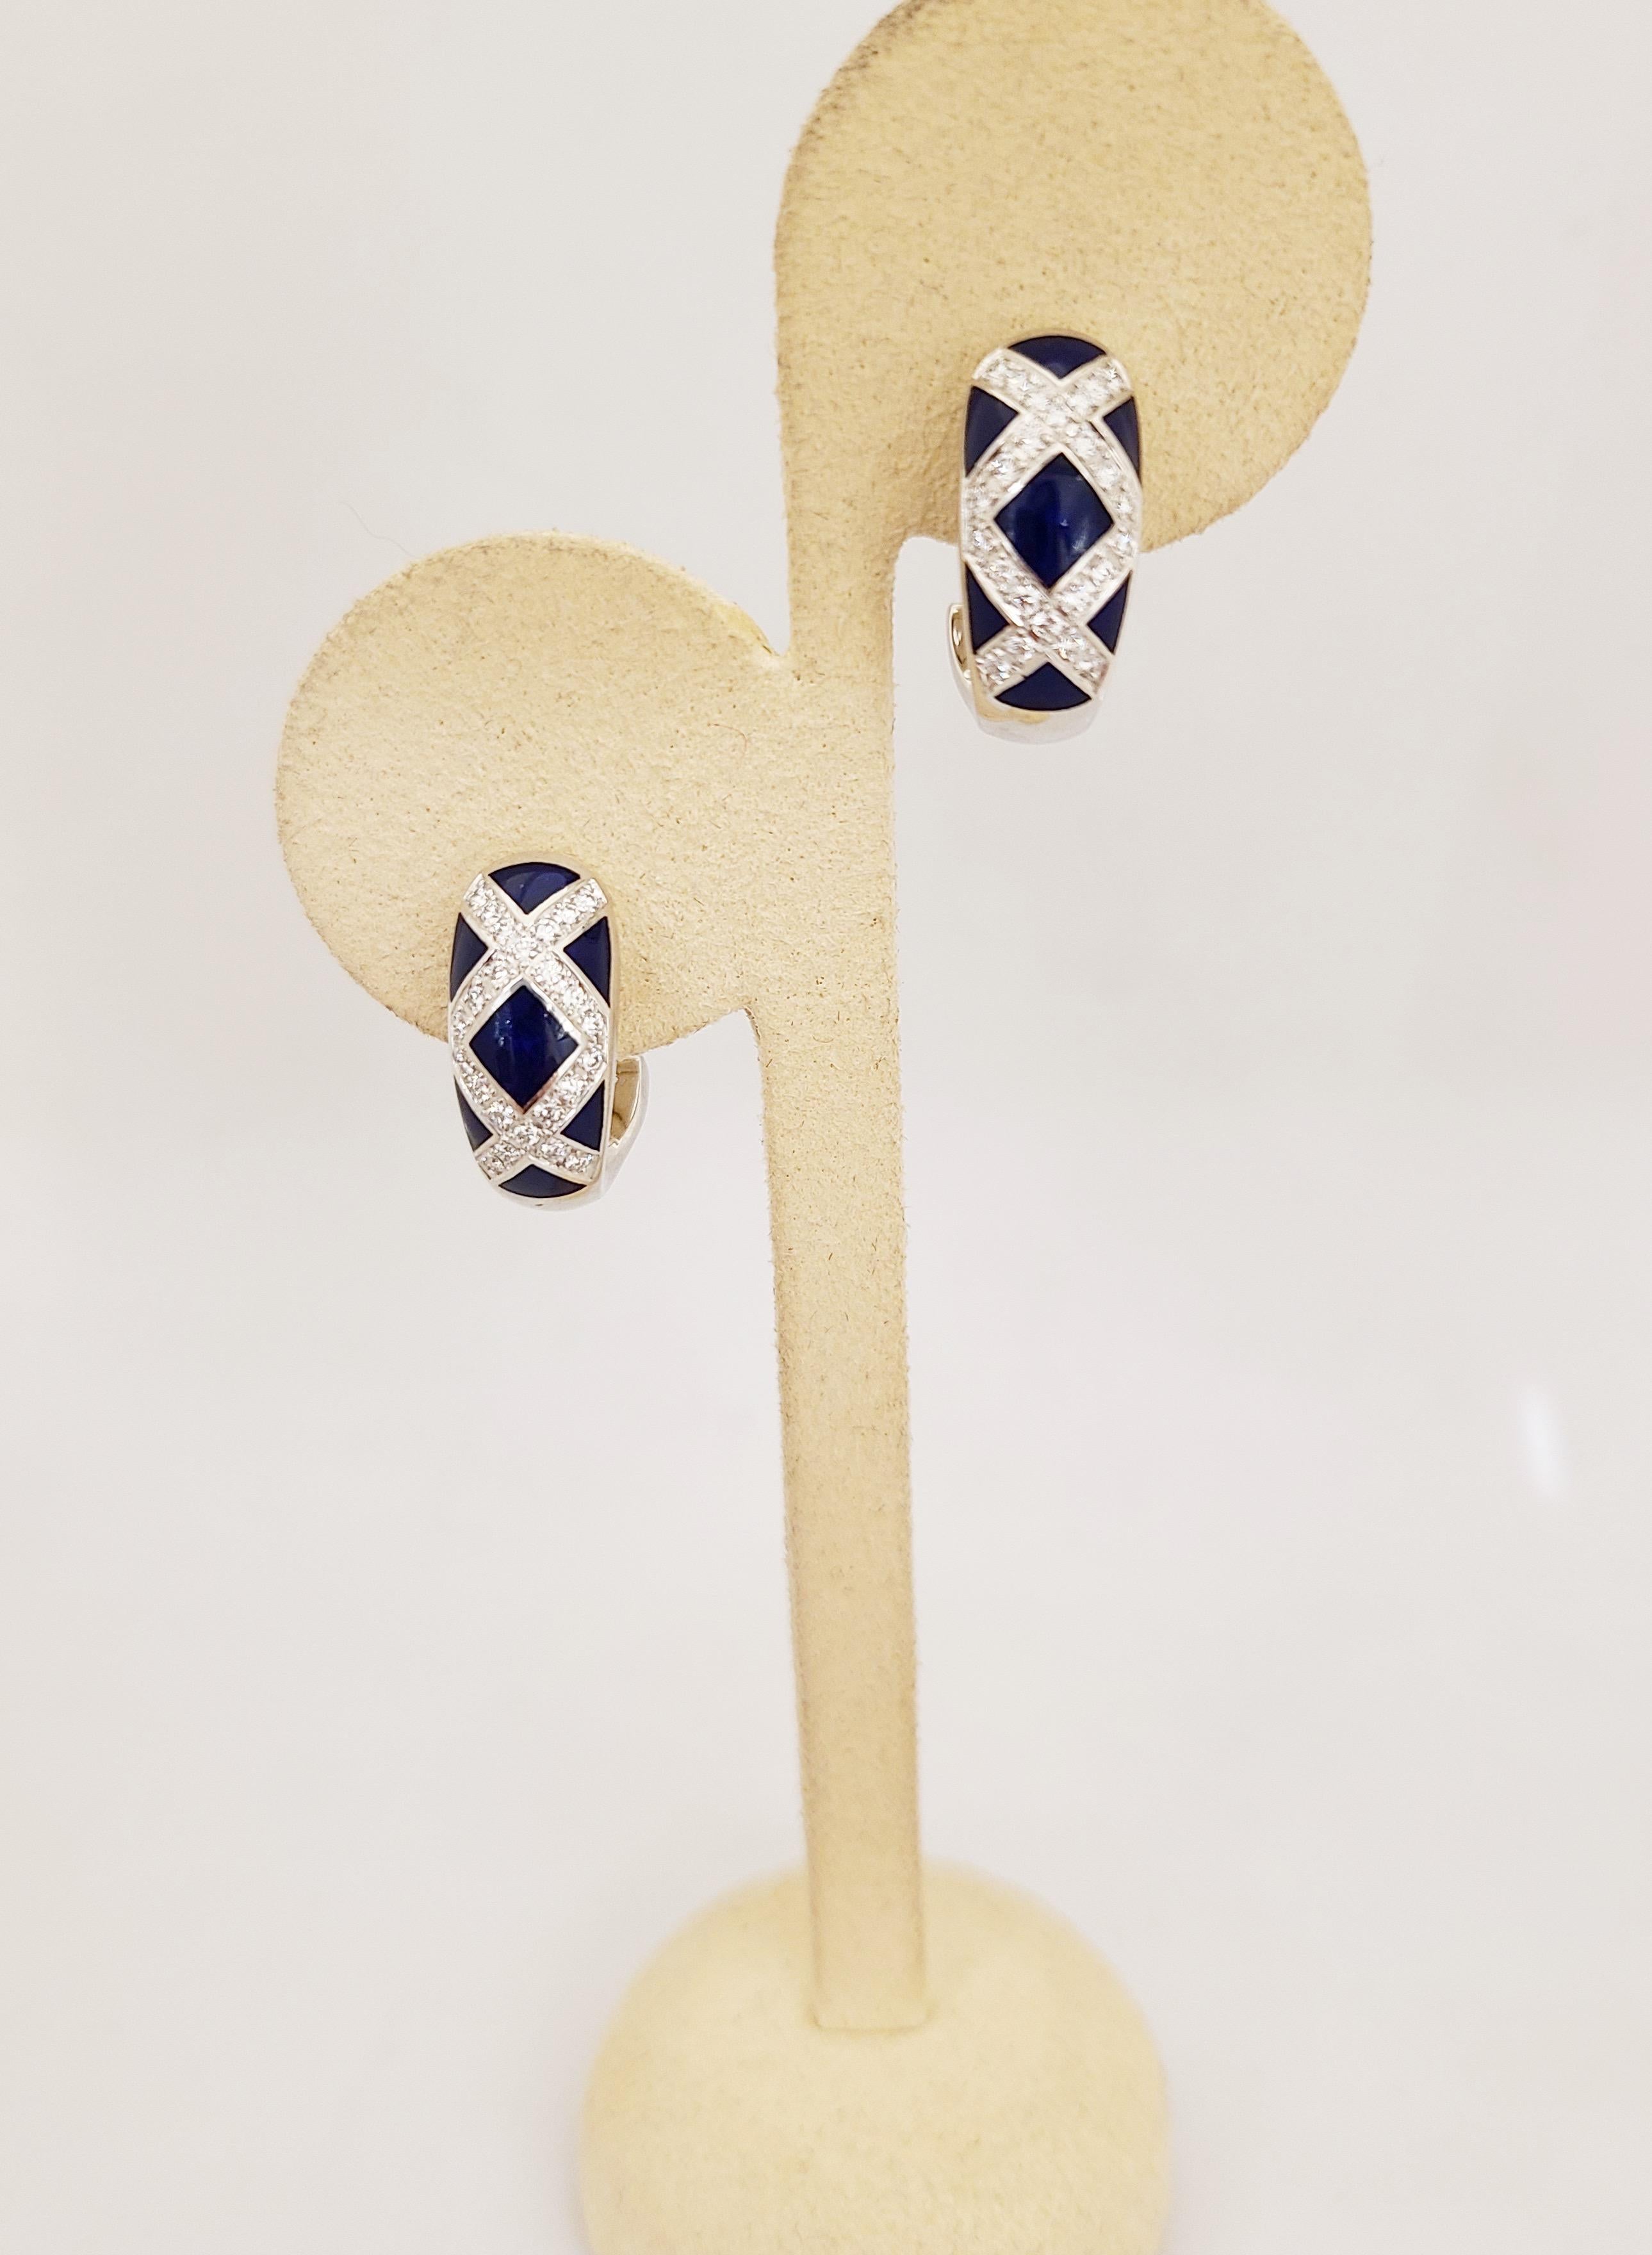 These stunning modern 18 karat white gold, diamond and blue enamel earrings were created by Victor Mayer for Faberge. Crafted in the tradition of the original House of Faberge, with meticulous attention to detail, these earrings are classic and